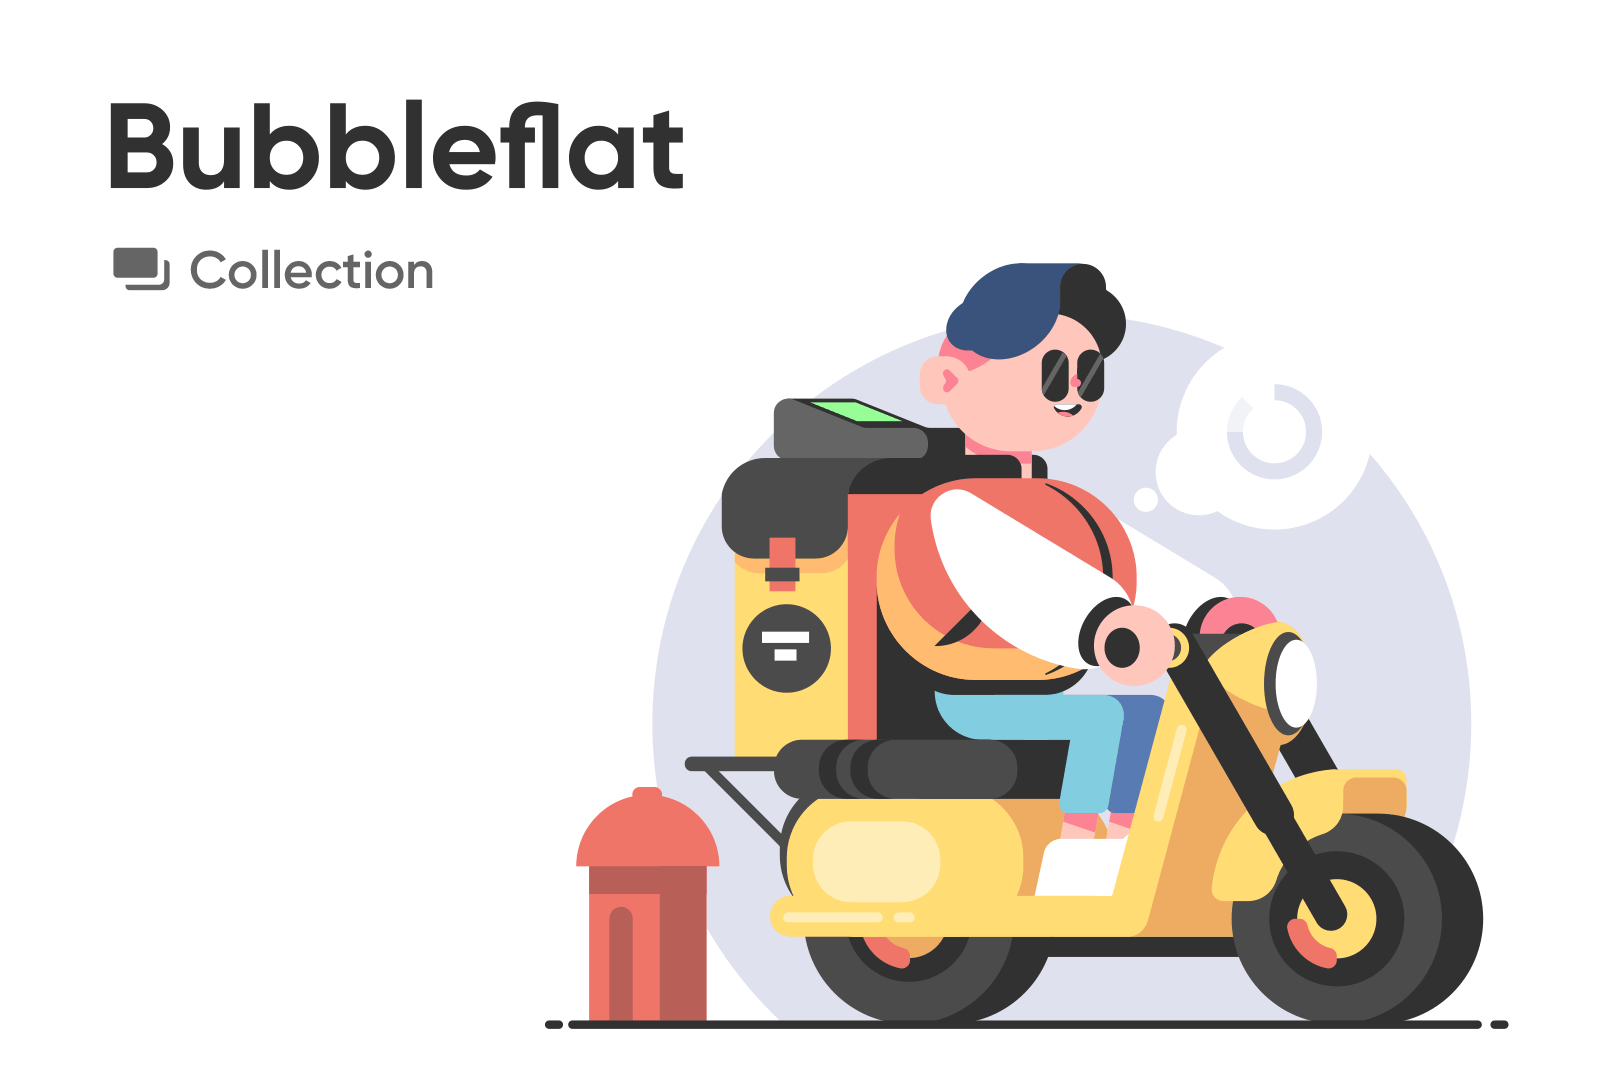 vector illustrations series made in classic flat style with sweet cartoon characters. Available exclusively on kit8.net